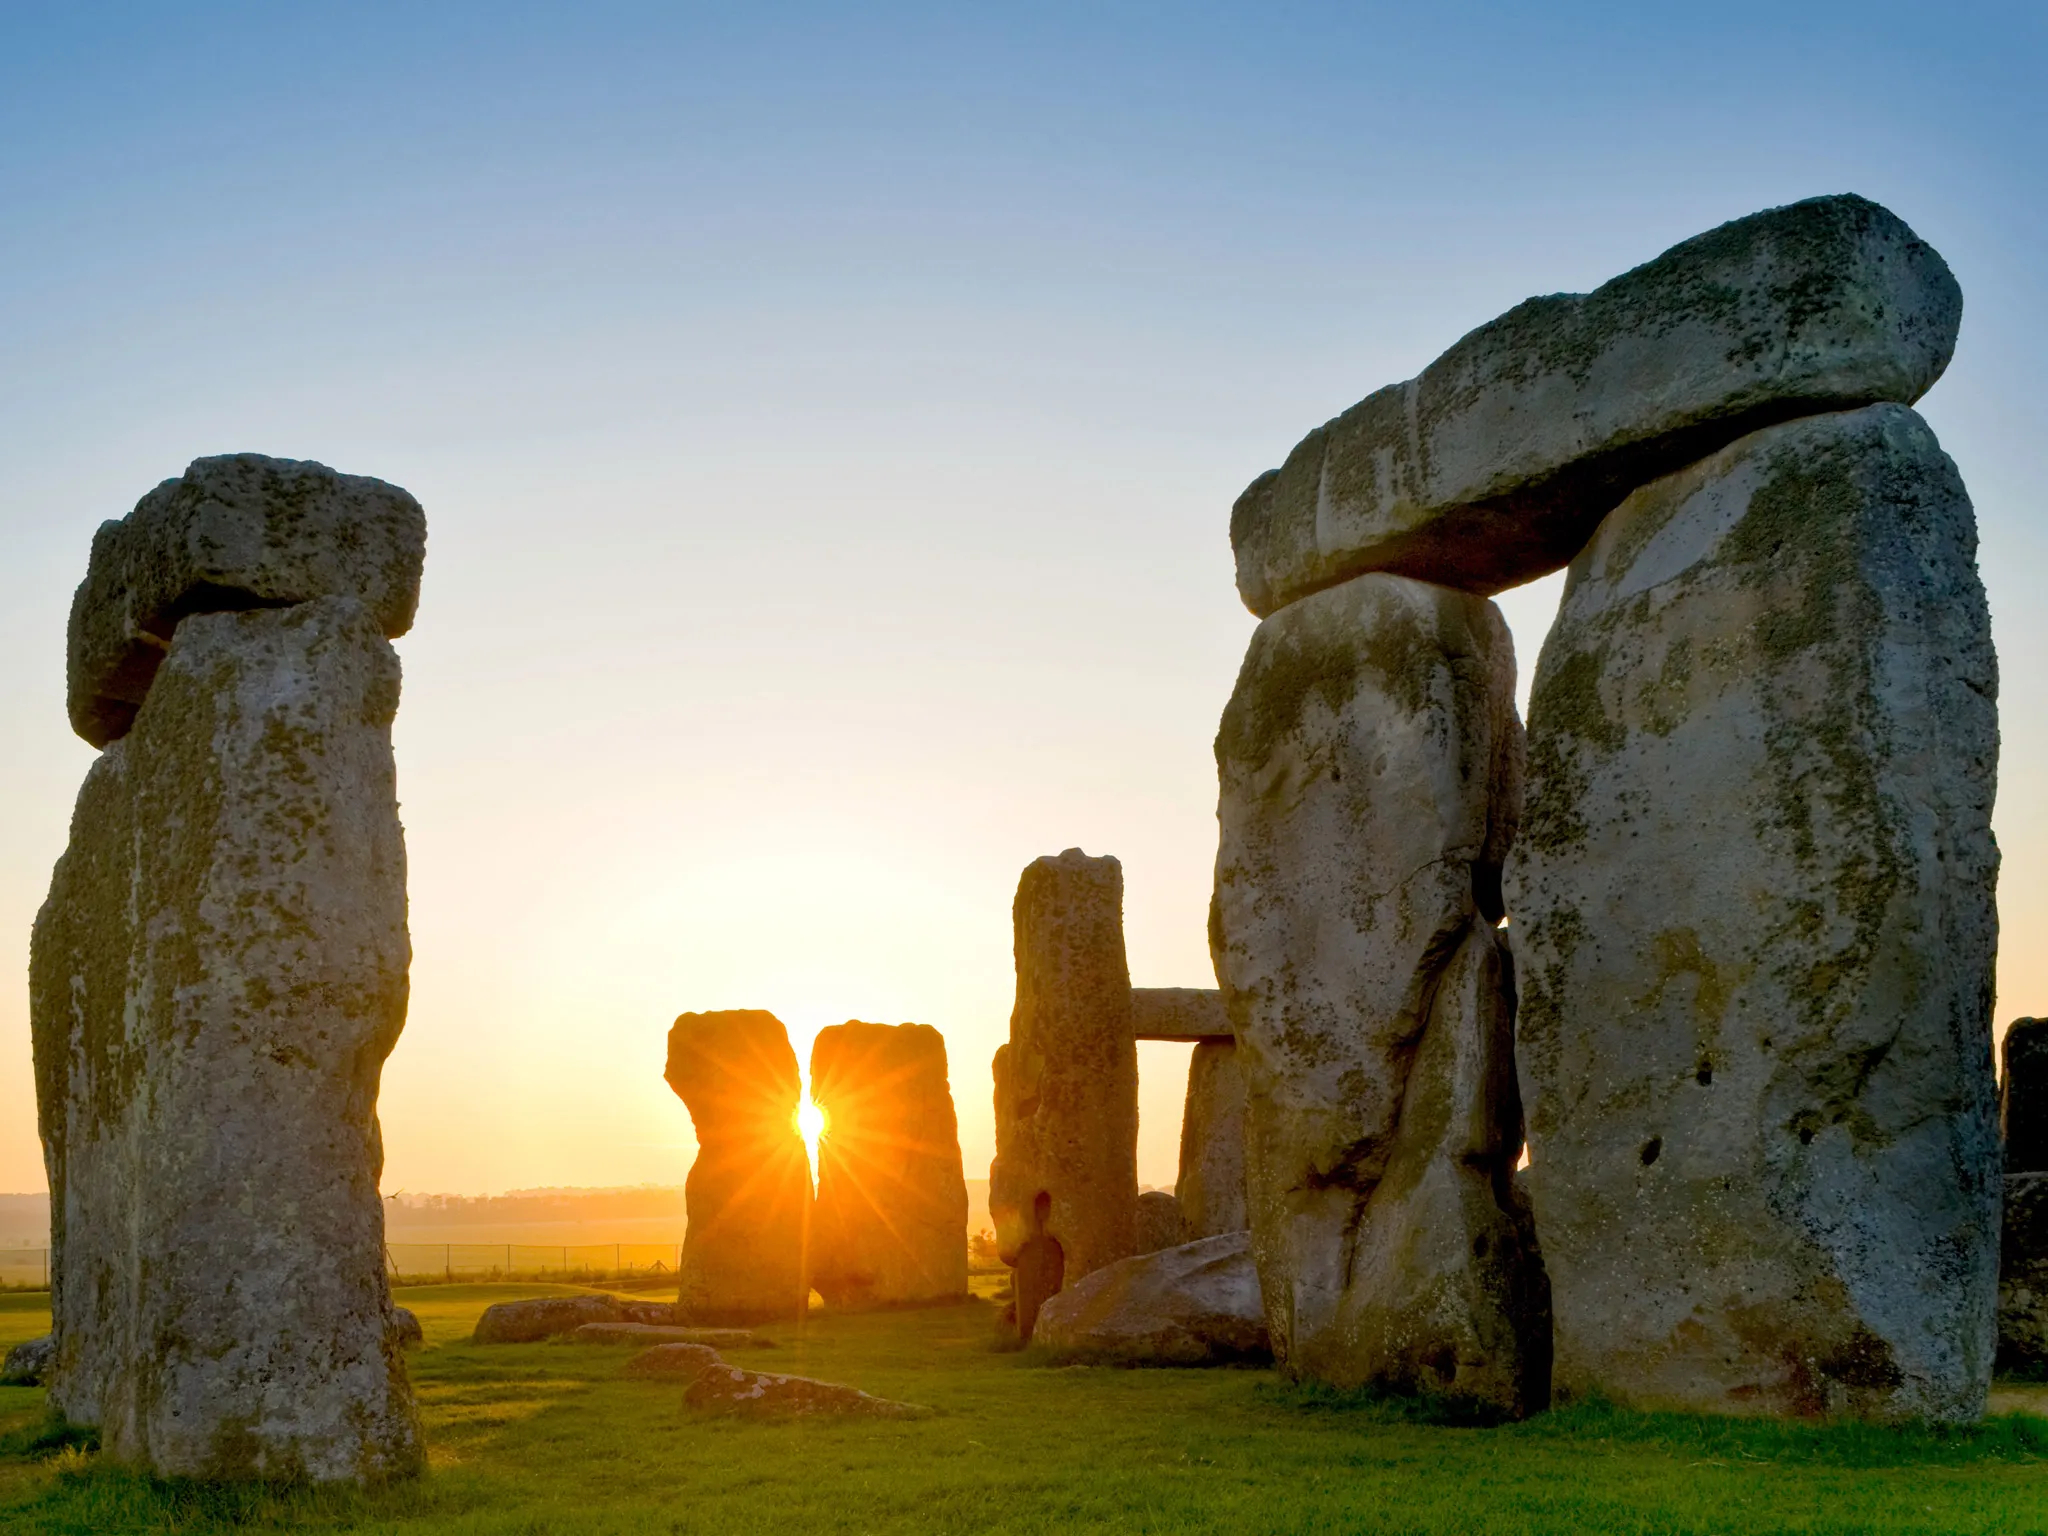 2048x1536 Stonehenge May Have Actually Been Built in Wales, Then Moved | Cond&Atilde;&copy; Nast Traveler